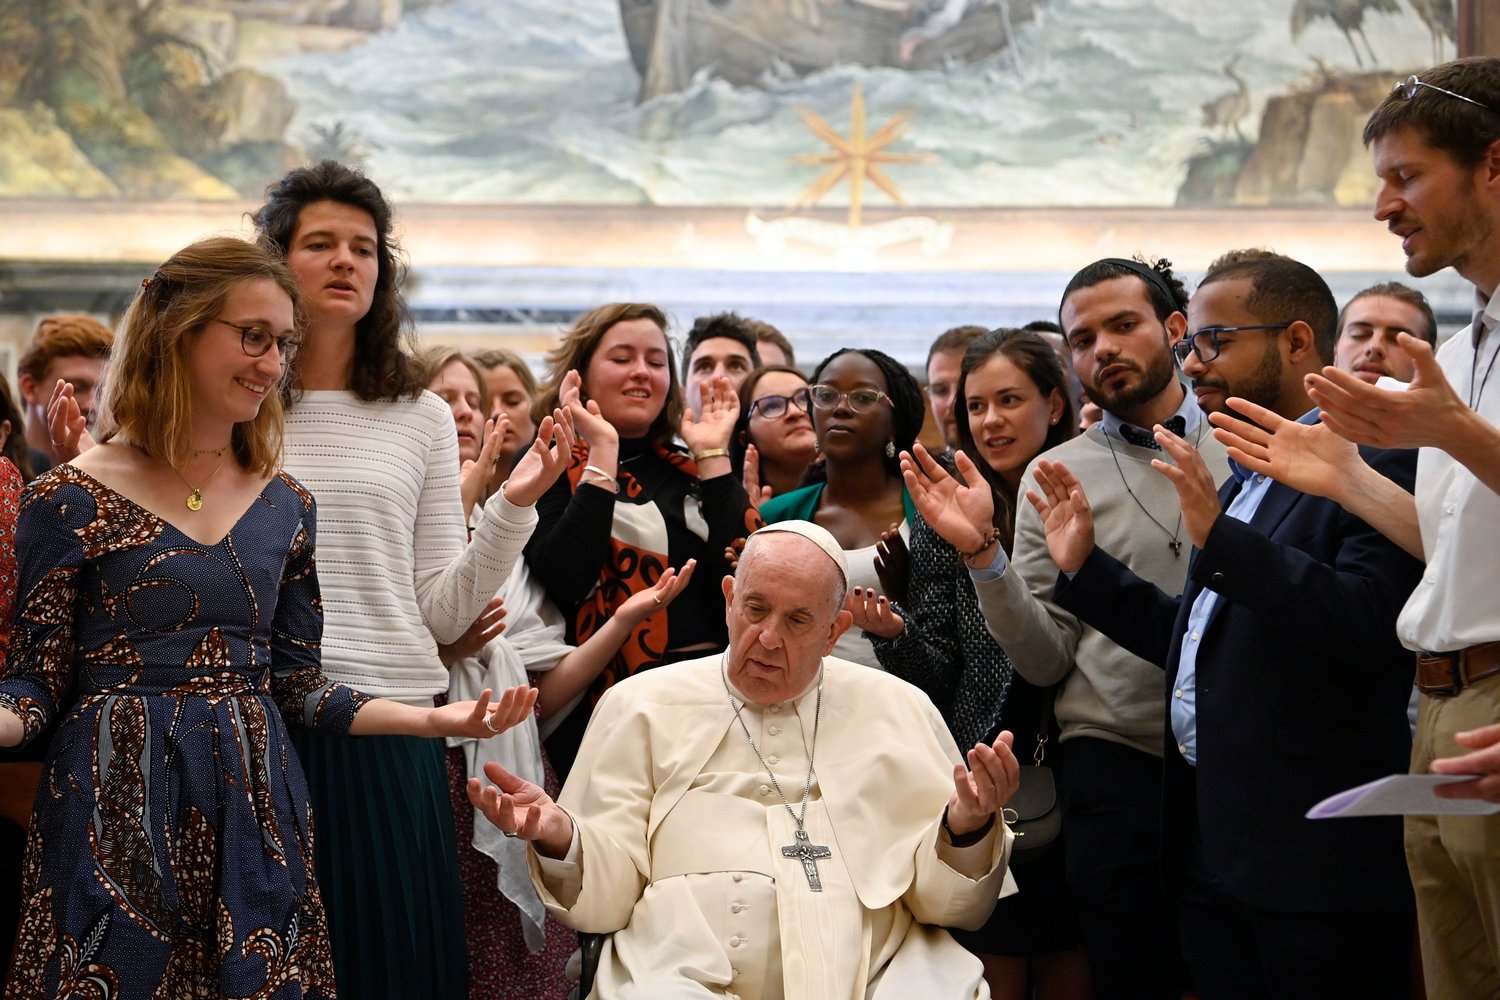 Pope Francis and members of the "Political Fraternity" project of the Chemin Neuf lay movement pray together at the end of an audience May 16, 2022, in the Clementine Hall of the Apostolic Palace at the Vatican. (CNS photo/Vatican Media)